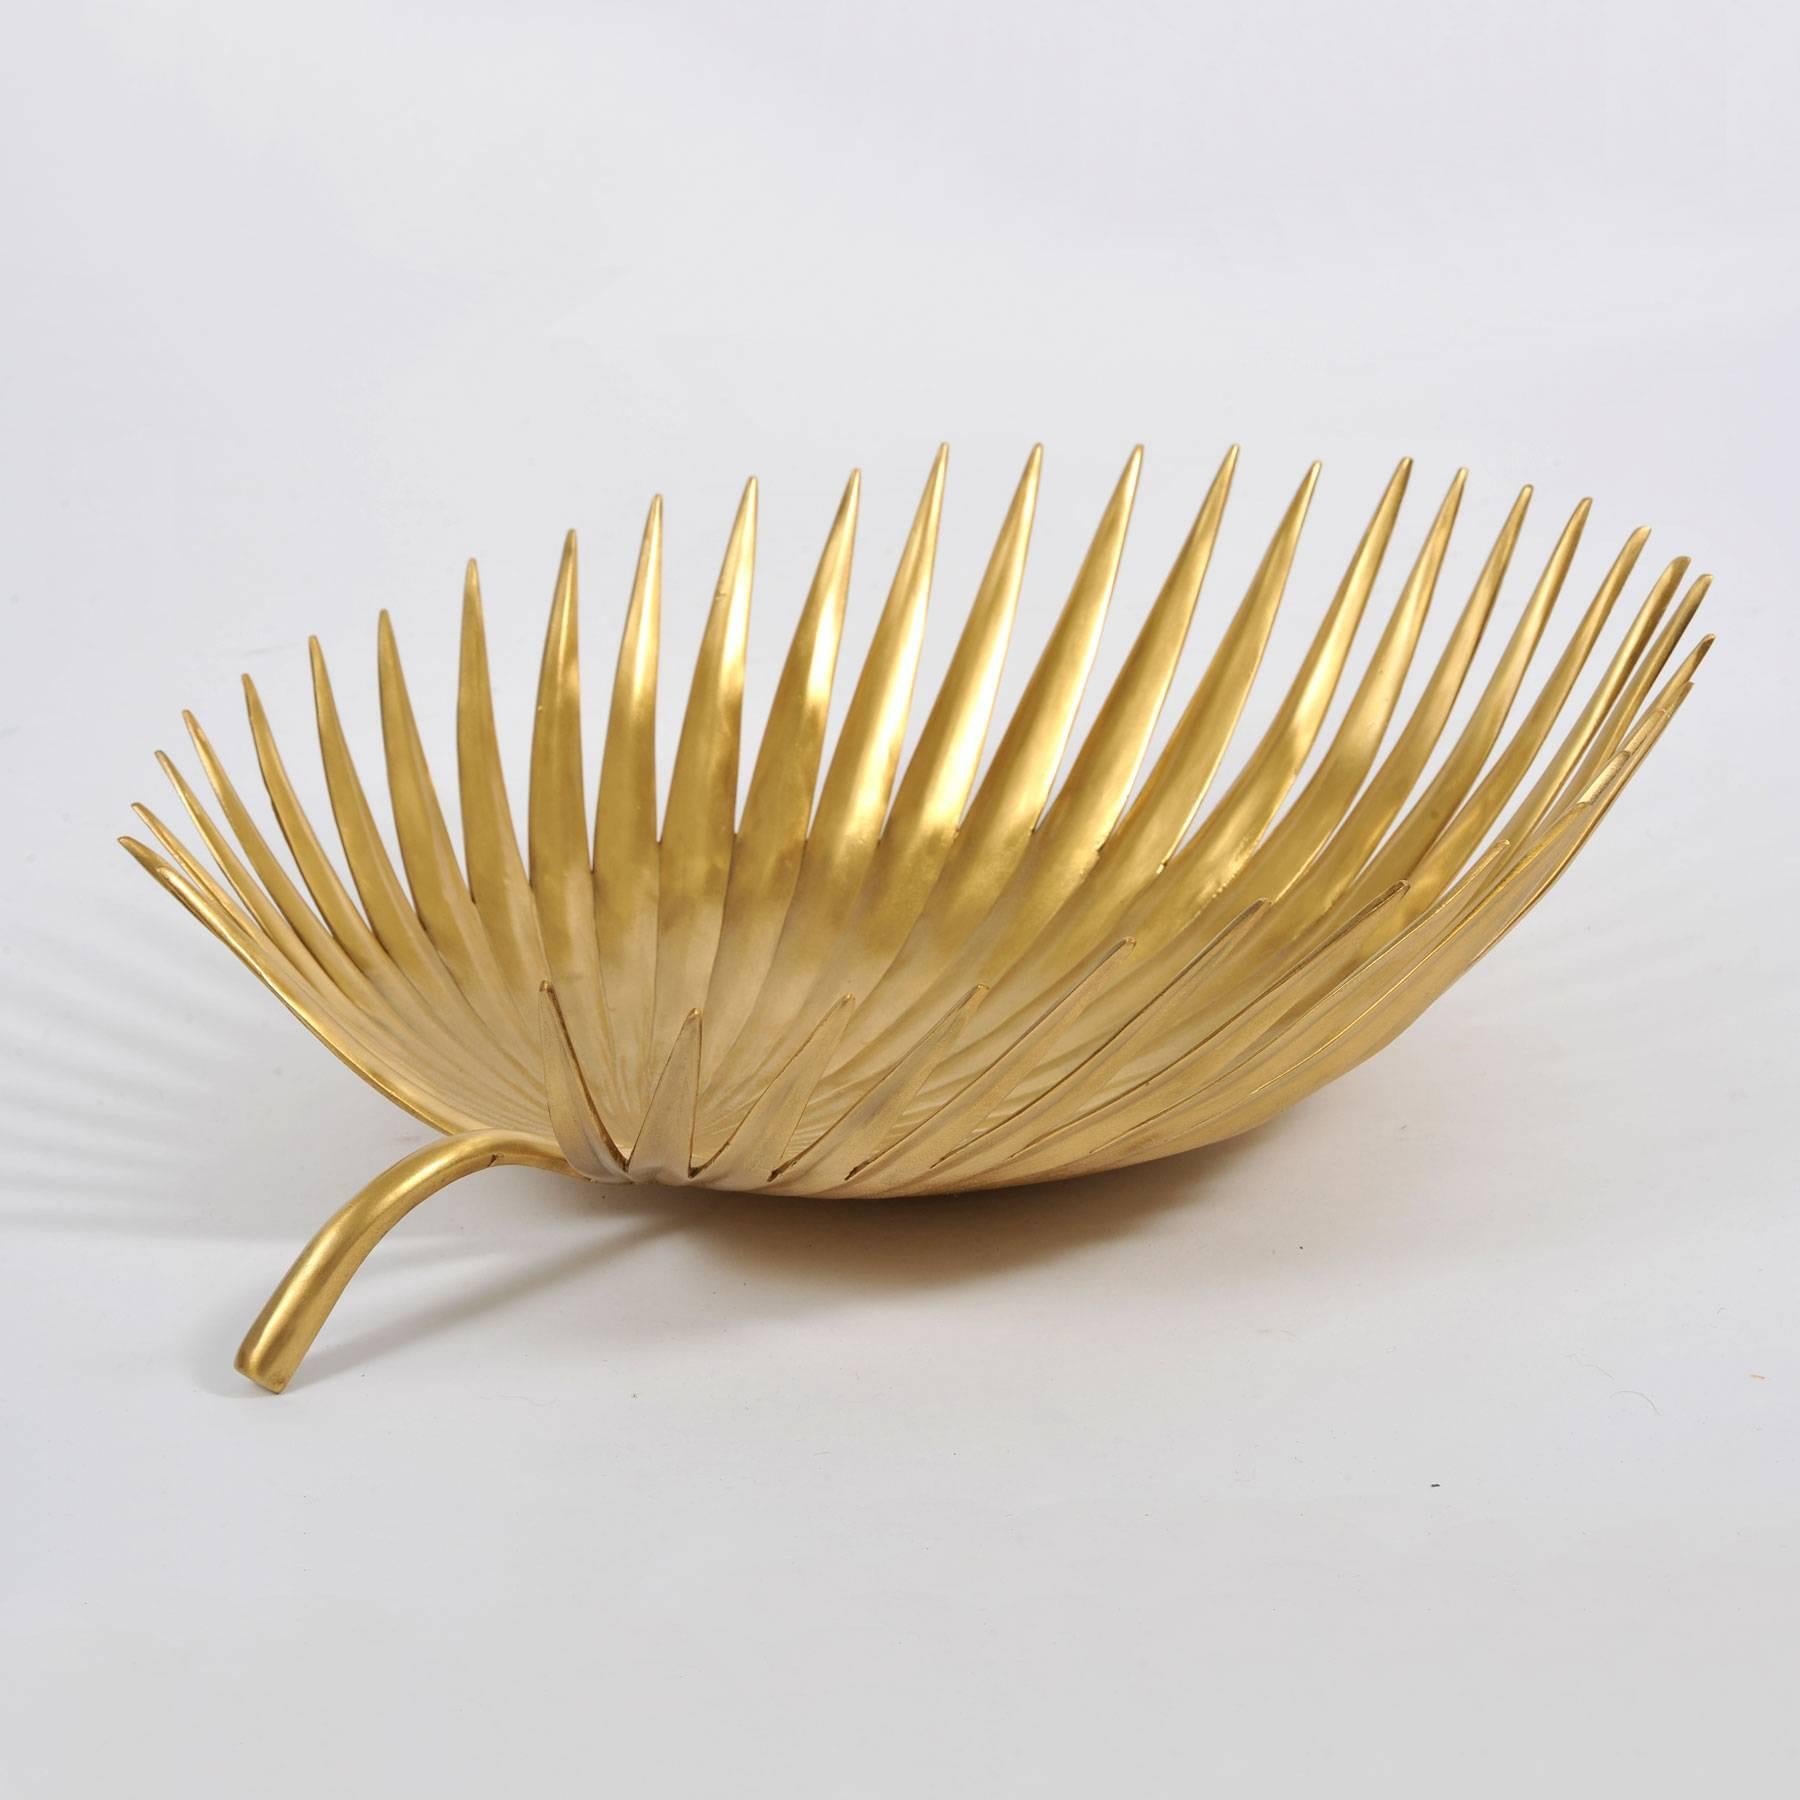 Homage to nature. Handmade cast brass palm leaf bowl. A centrepiece bowl which is substantial and sturdy yet retains the delicate soft feel of nature's design.